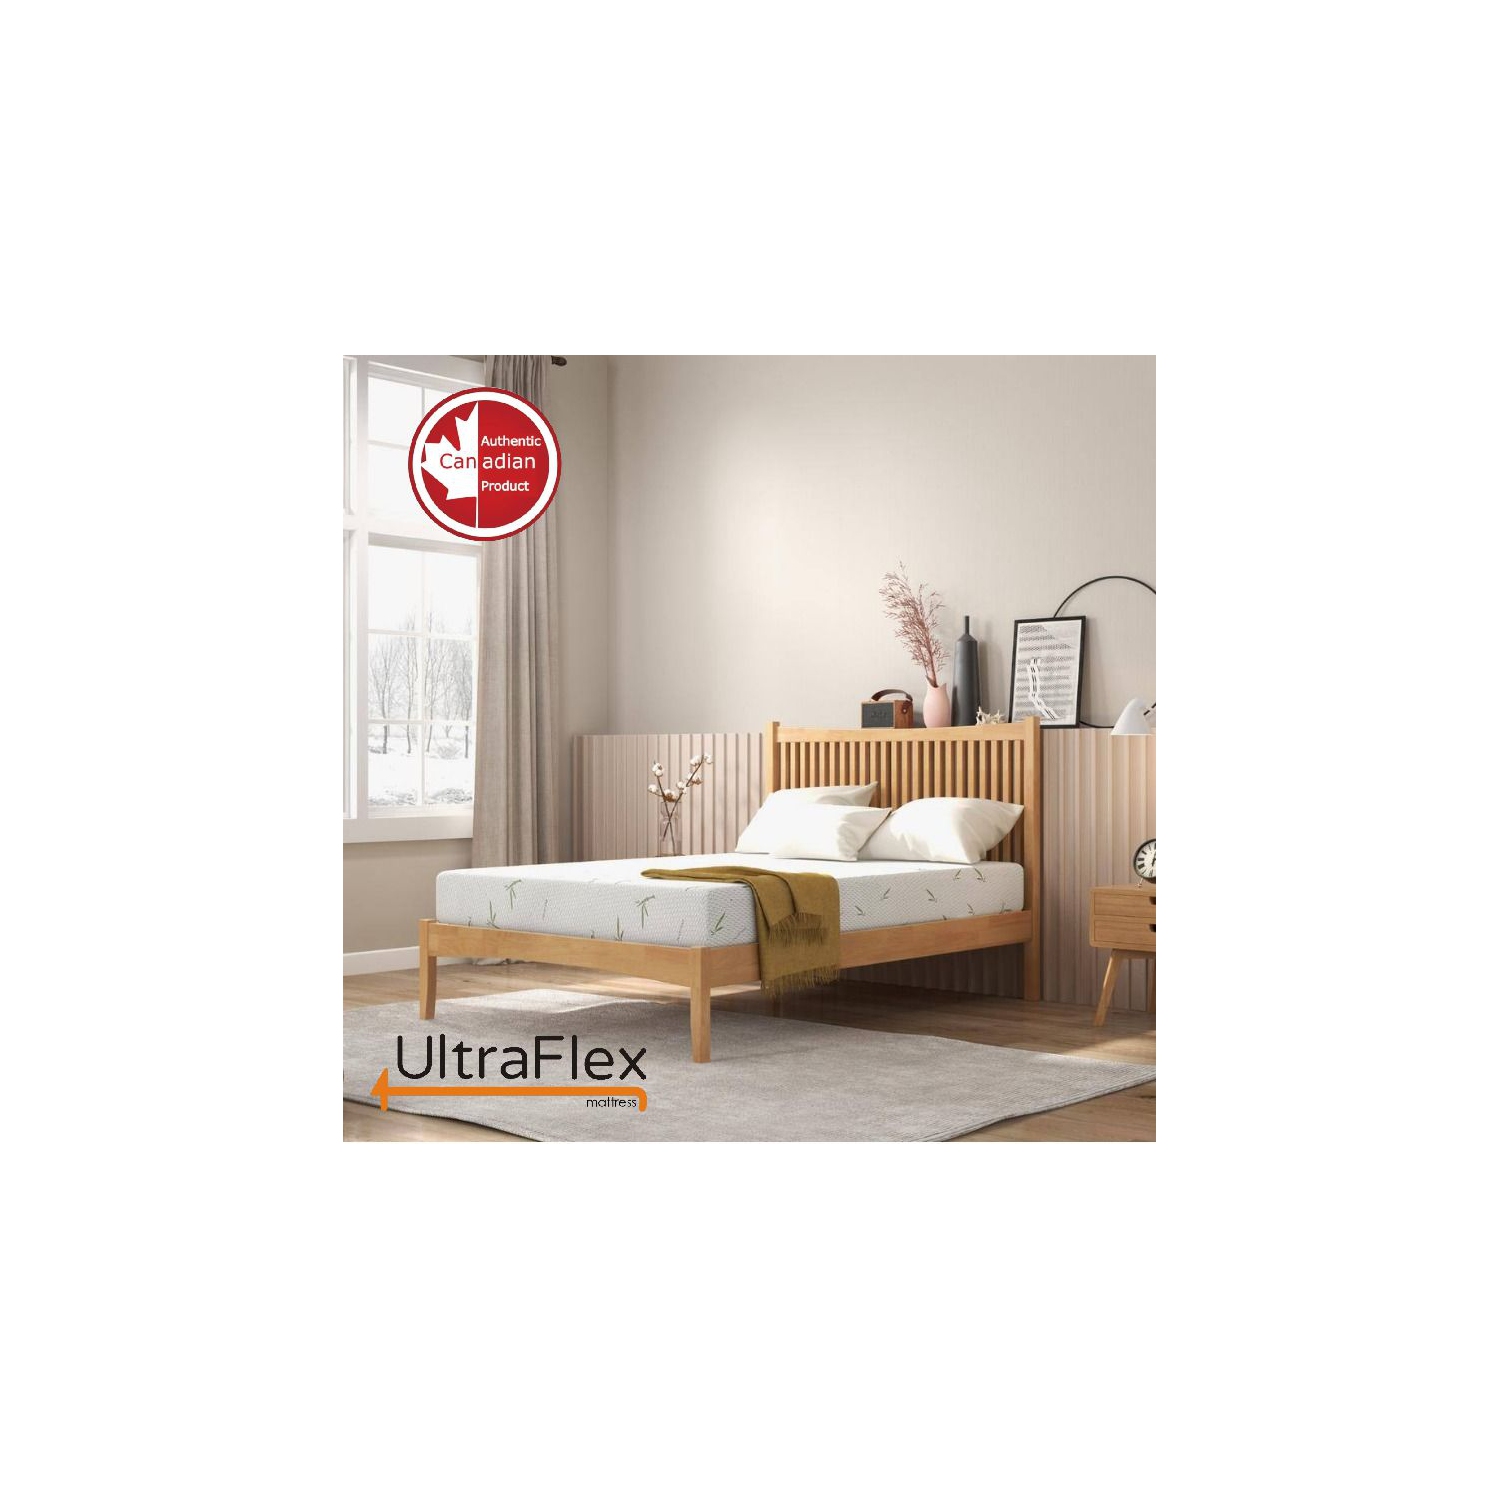 UltraFlex EasySleep Mattress- Canadian-Made Medium Firm Gel Infused Reversible Comfort, Pressure Relief, Bamboo Cover, CertiPUR-US® Certified Foam, Made in Canada- Double/Full Size